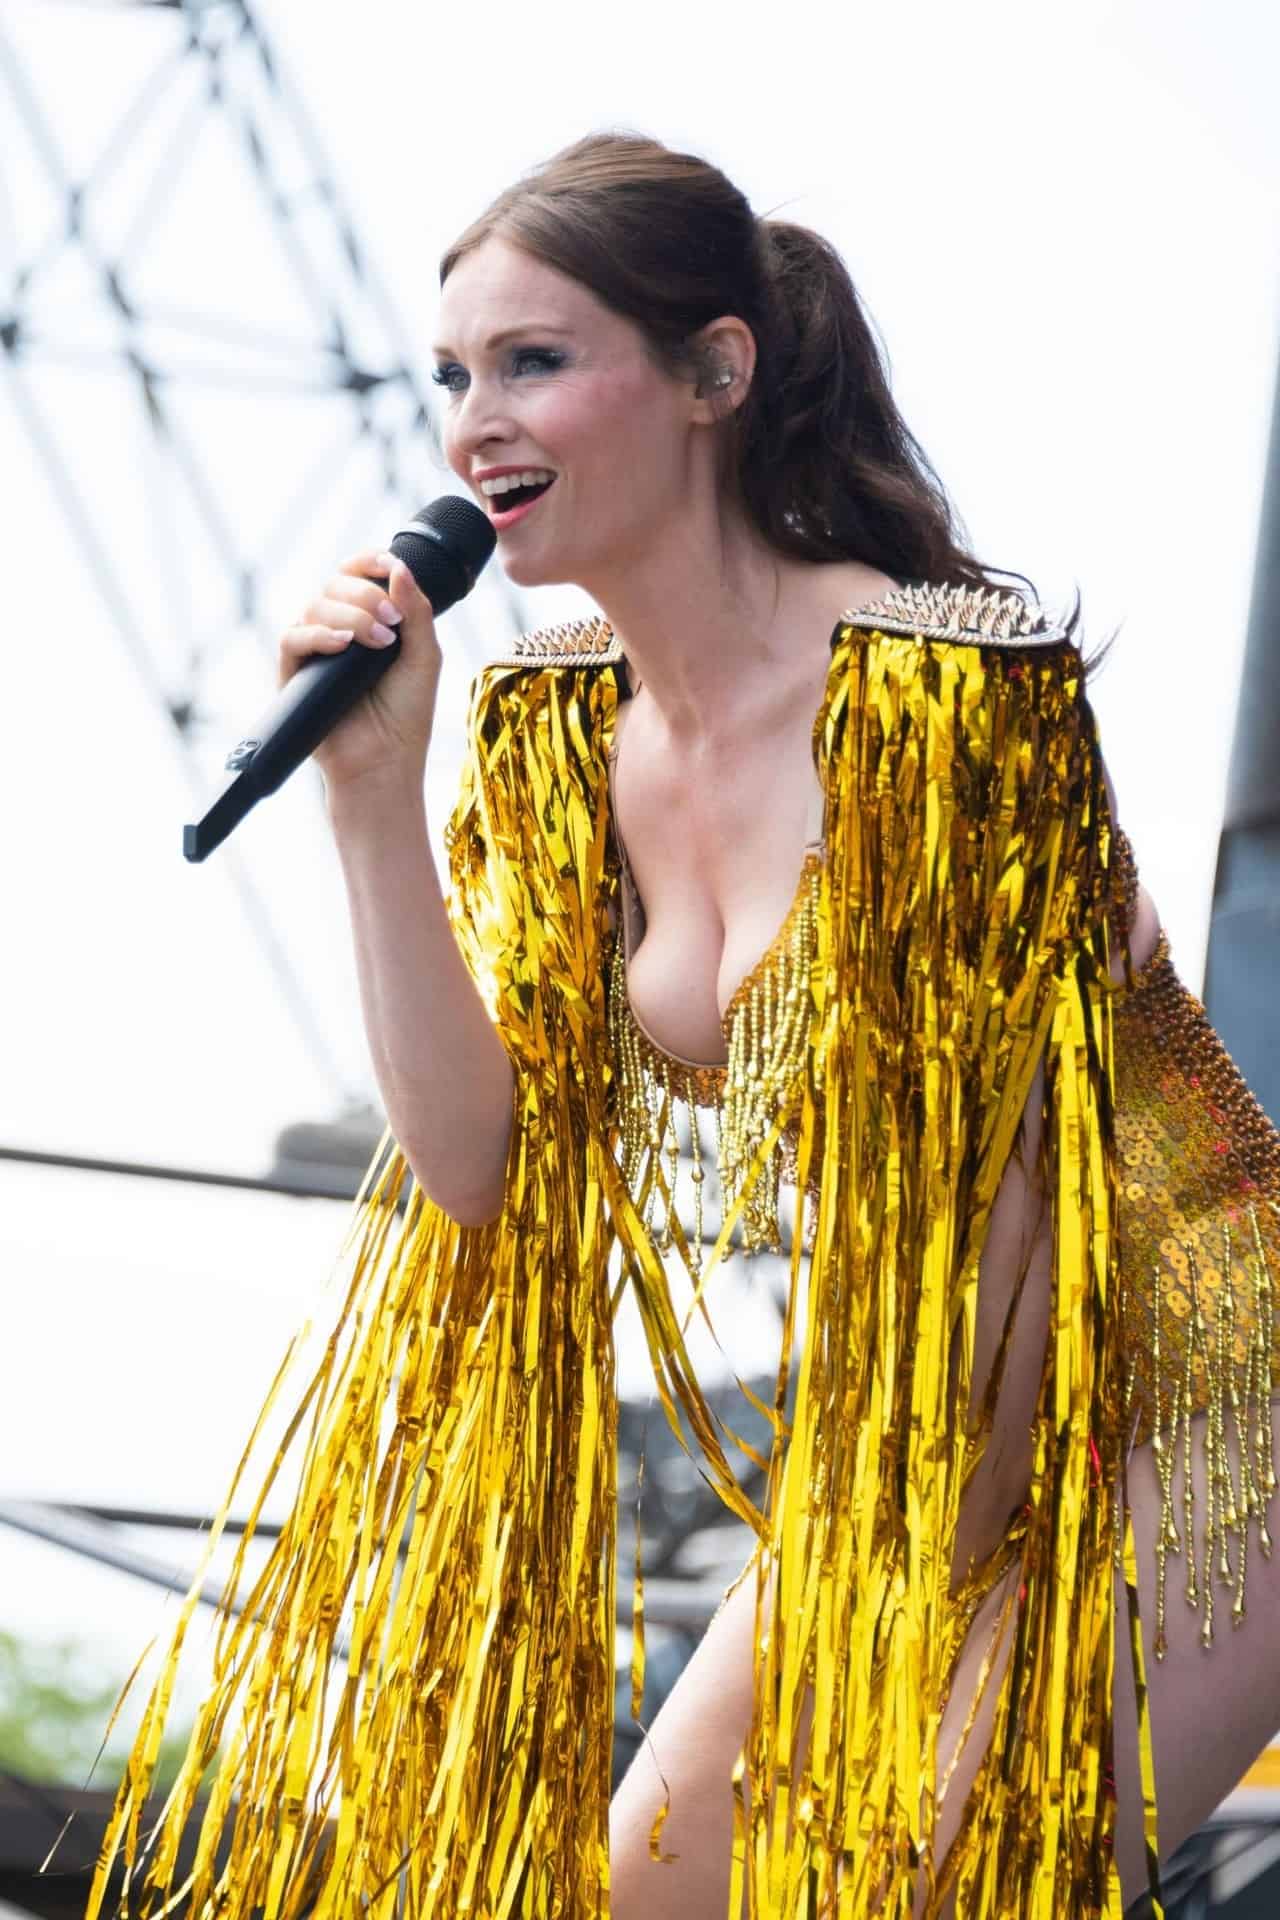 Sophie Ellis-Bextor Made a Spectacle at the Glastonbury Festival